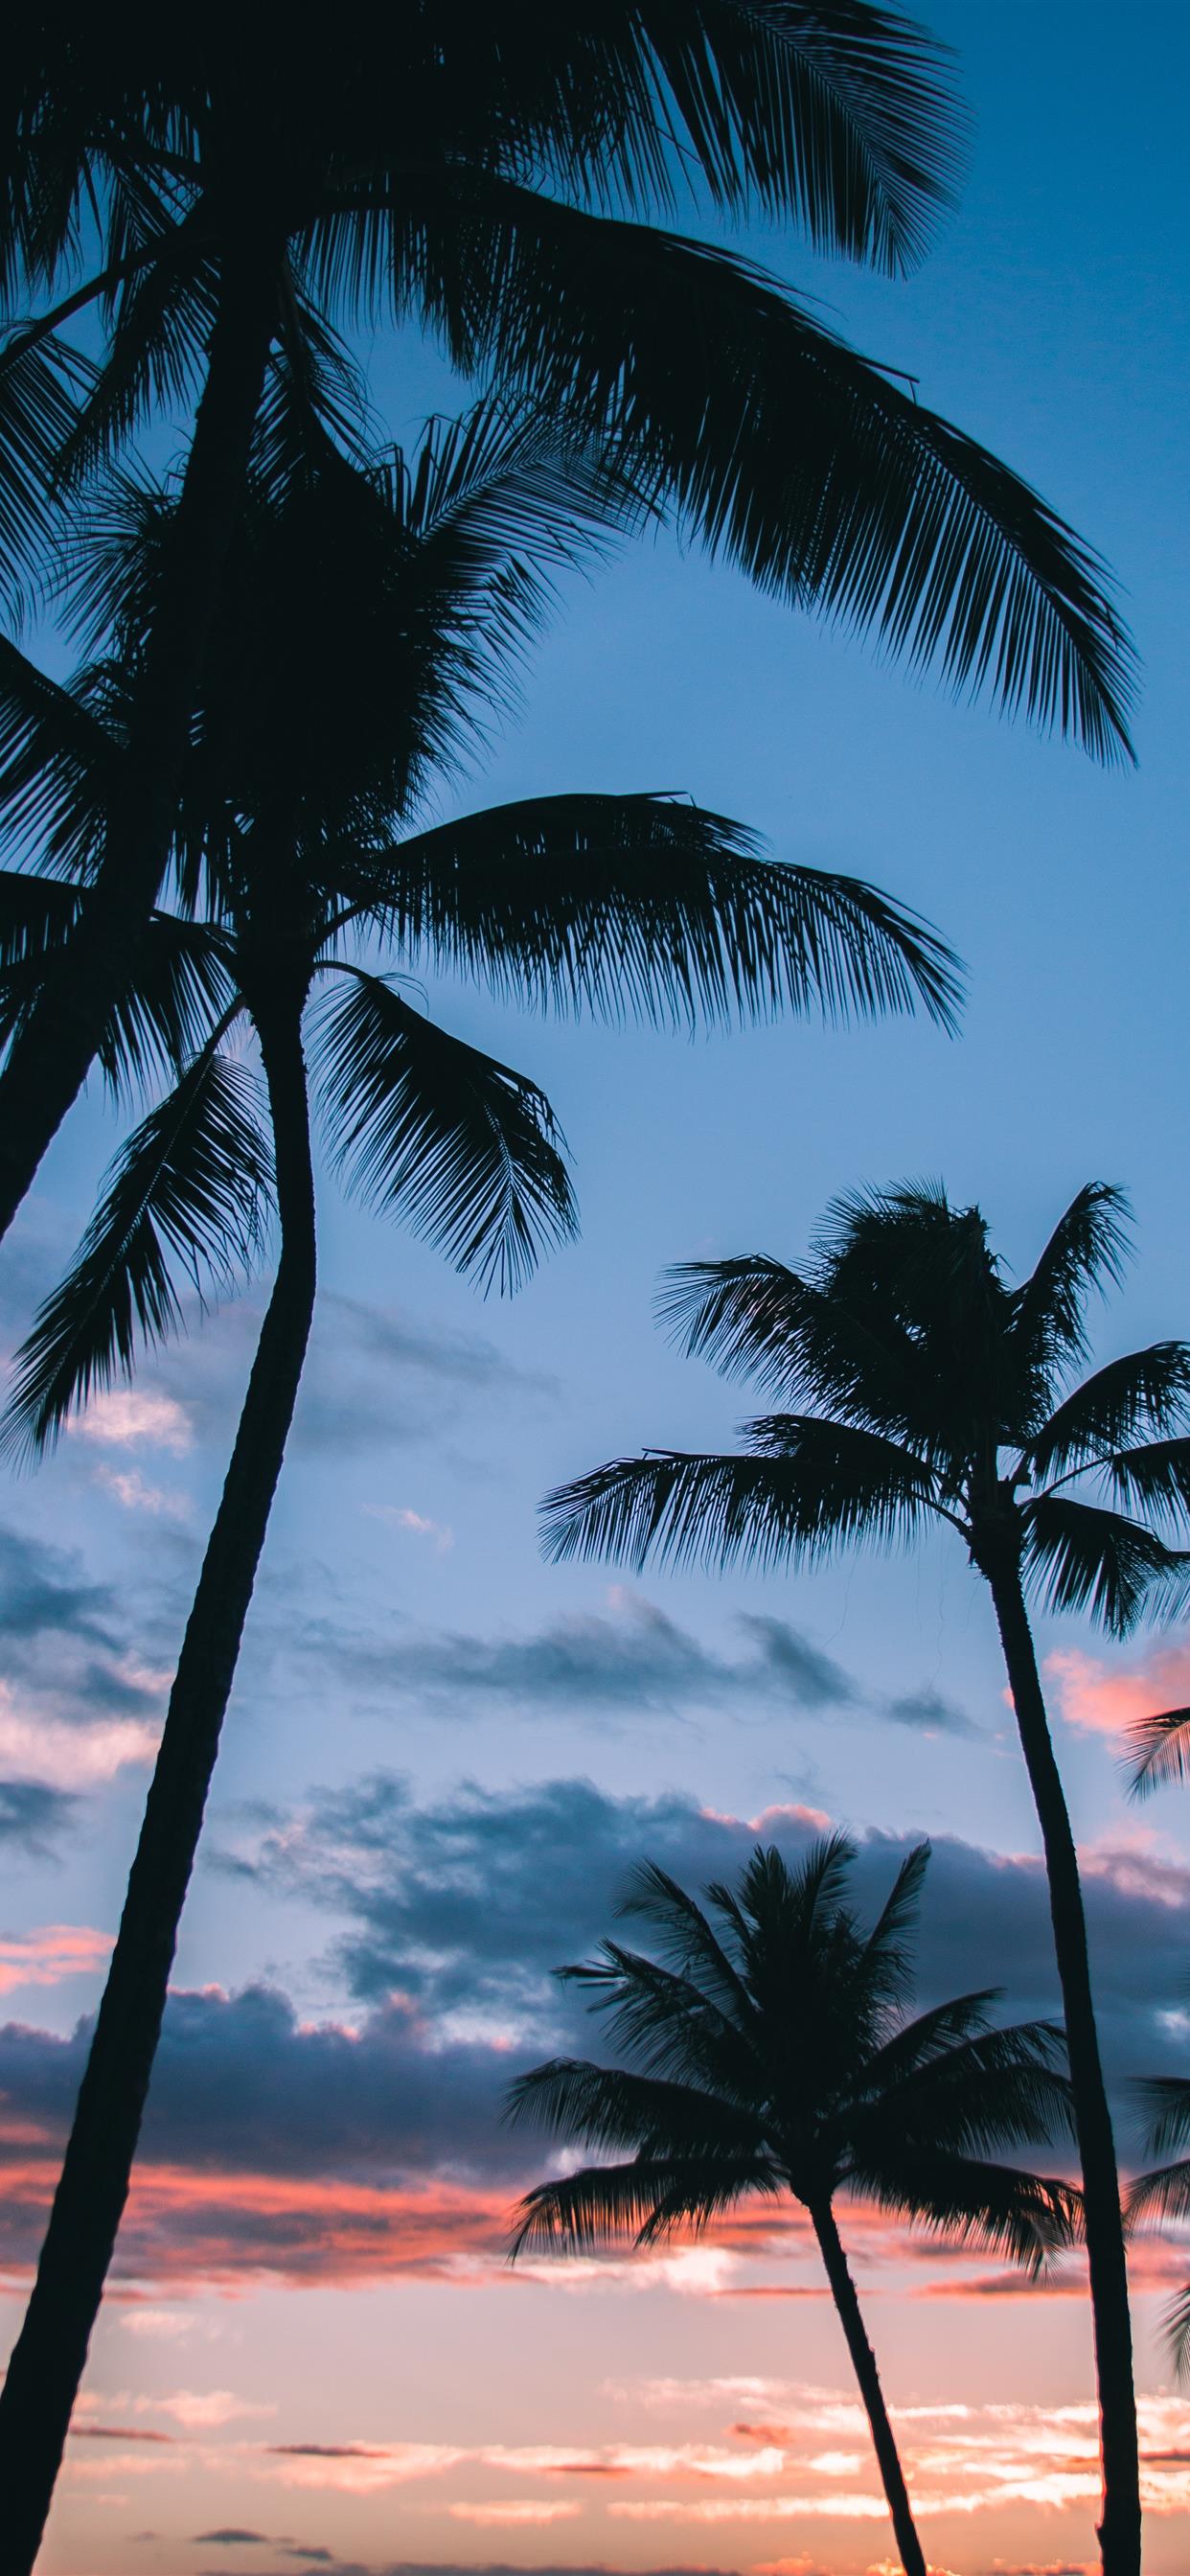 Palm Trees Sunset IPhone Wallpaper HD  IPhone Wallpapers  iPhone  Wallpapers